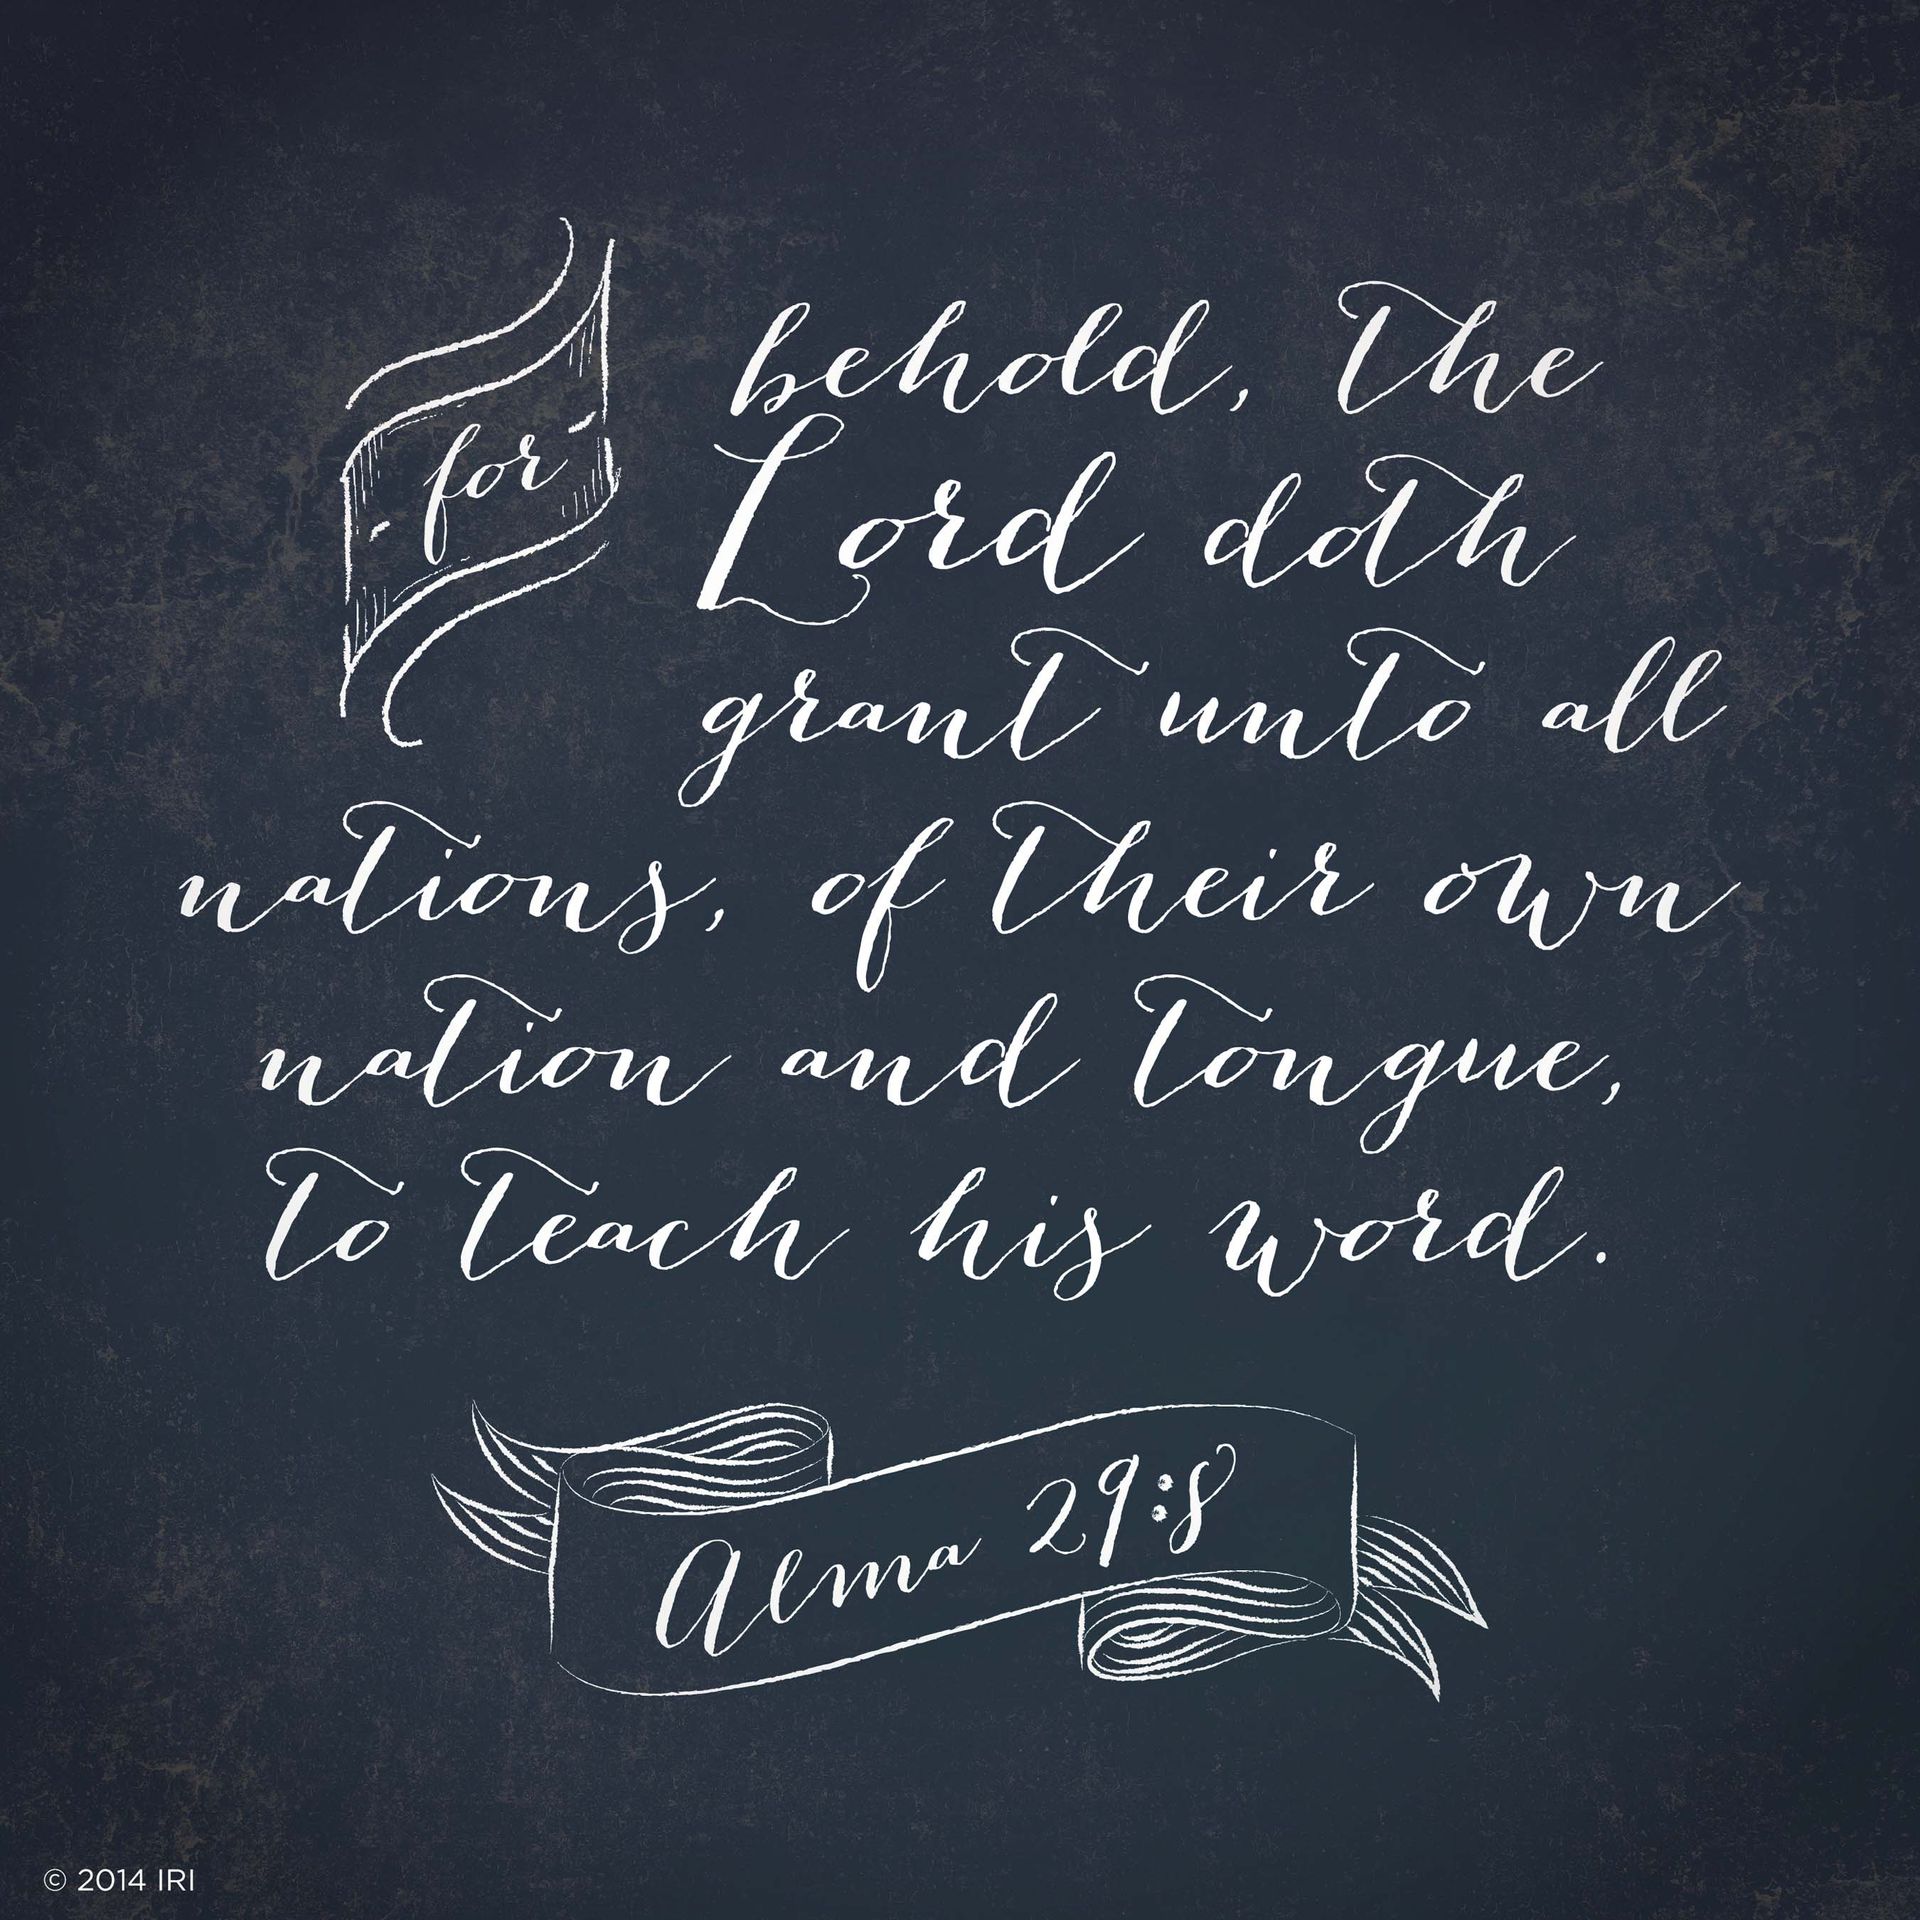 “For behold, the Lord doth grant unto all nations, of their own nation and tongue, to teach his word.”—Alma 29:8